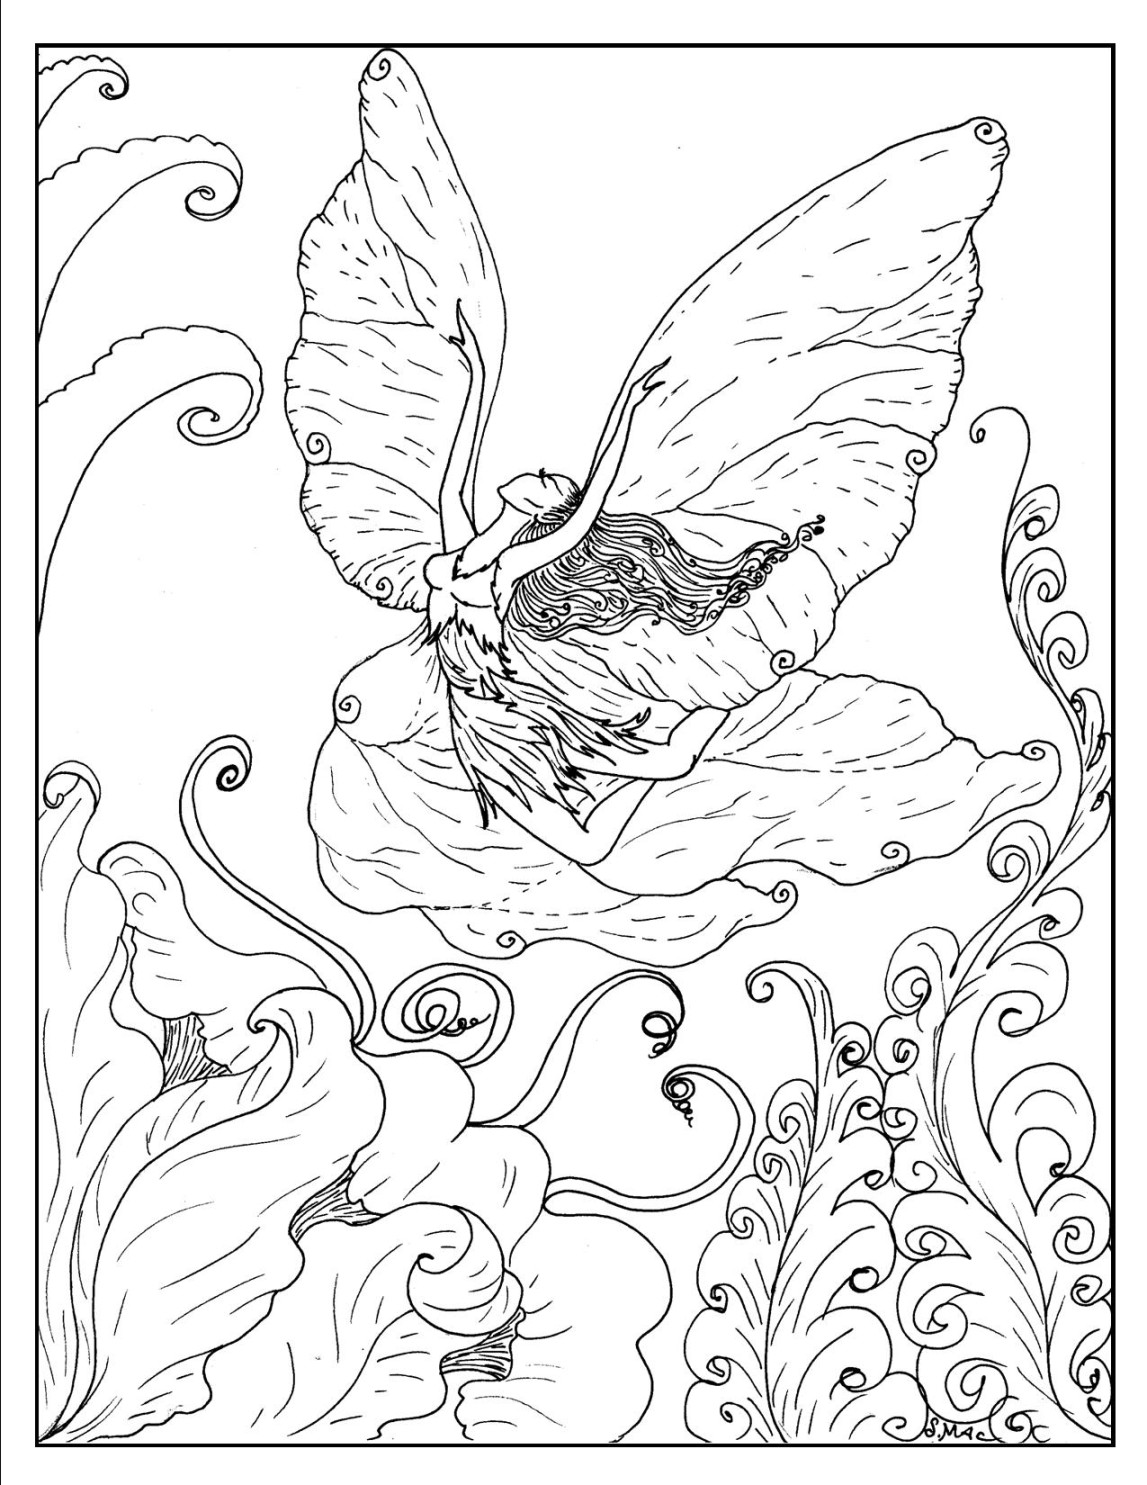 Fantasy Coloring Pages - Best Coloring Pages For Kids